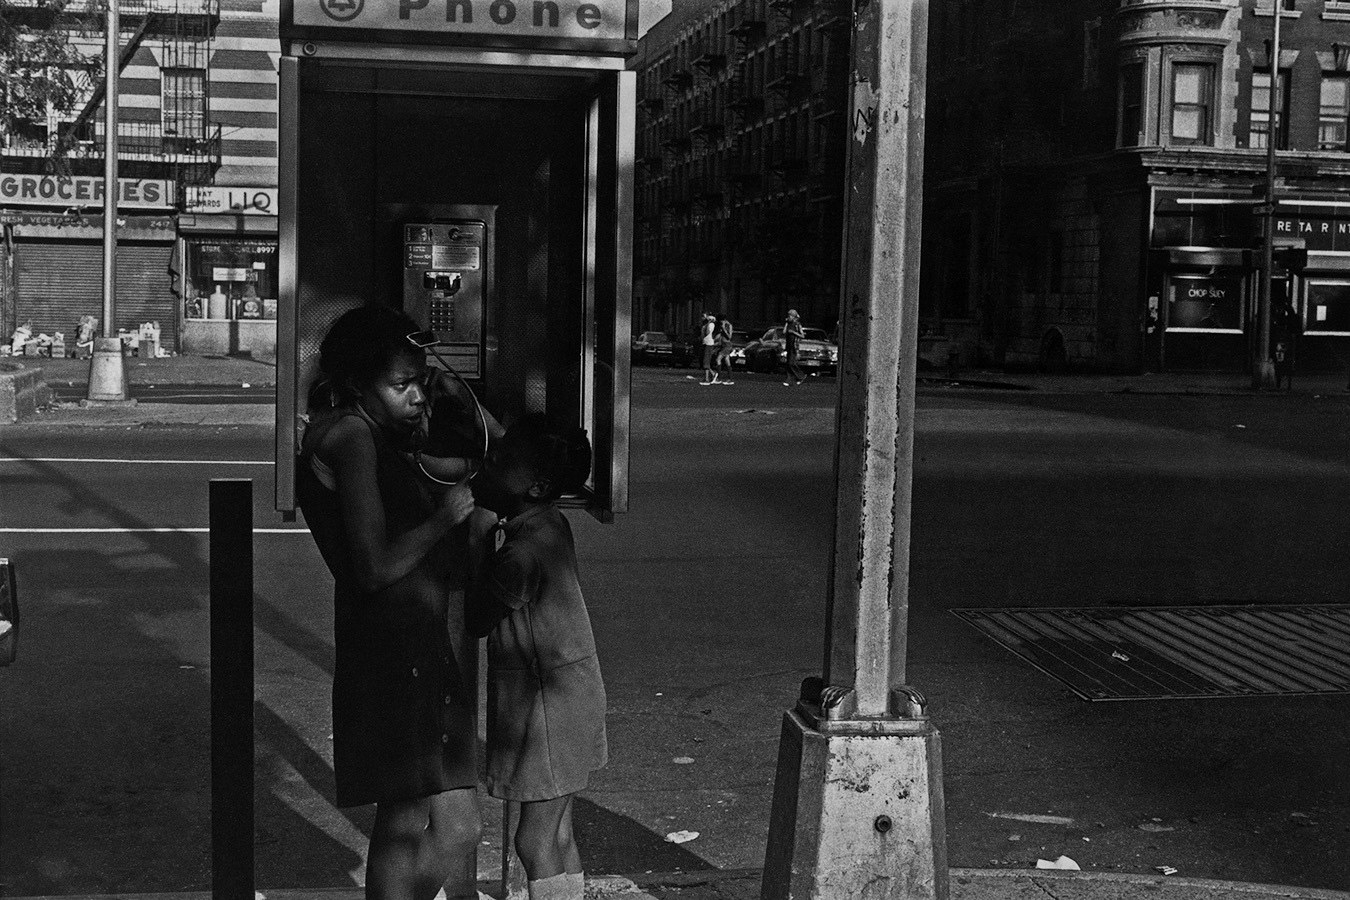 A mother and child at a payphone on an empty street, lamp post in the foreground 